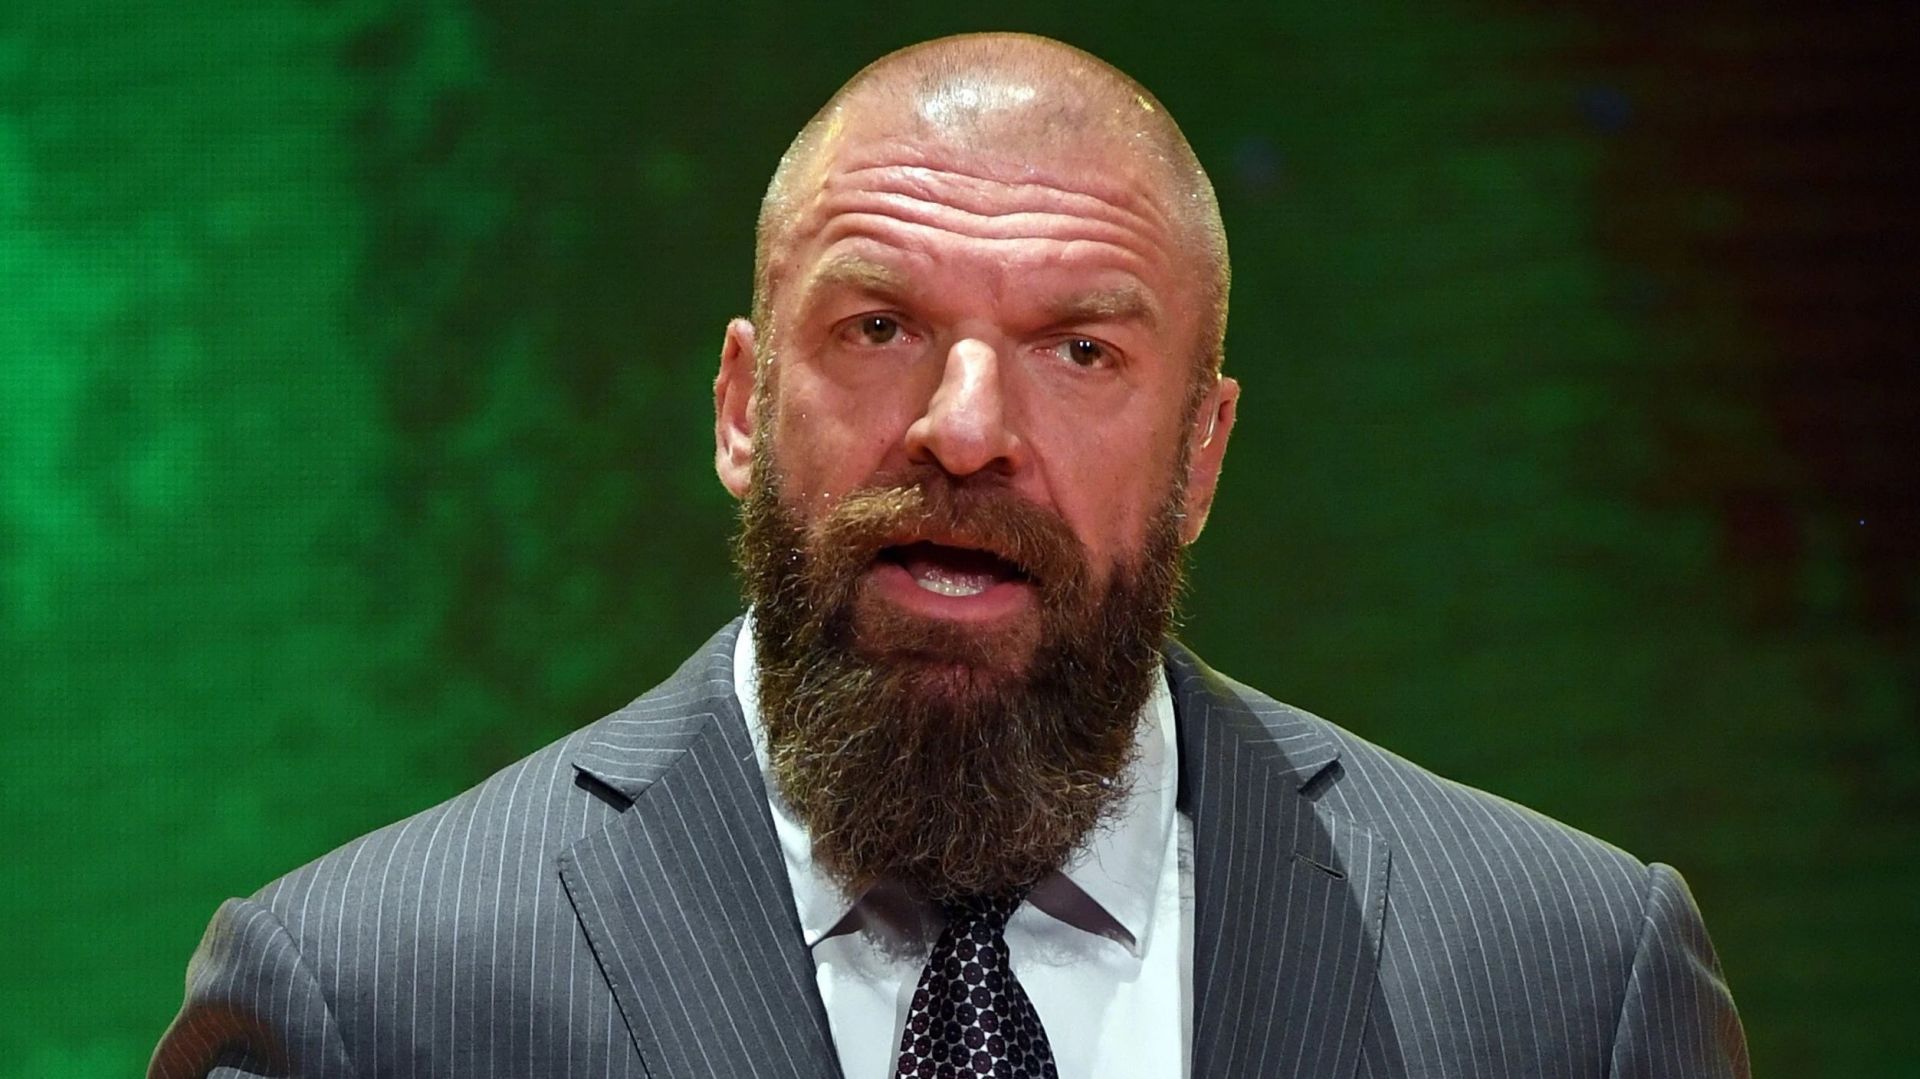 Triple H is looking to bring many college athletes to WWE